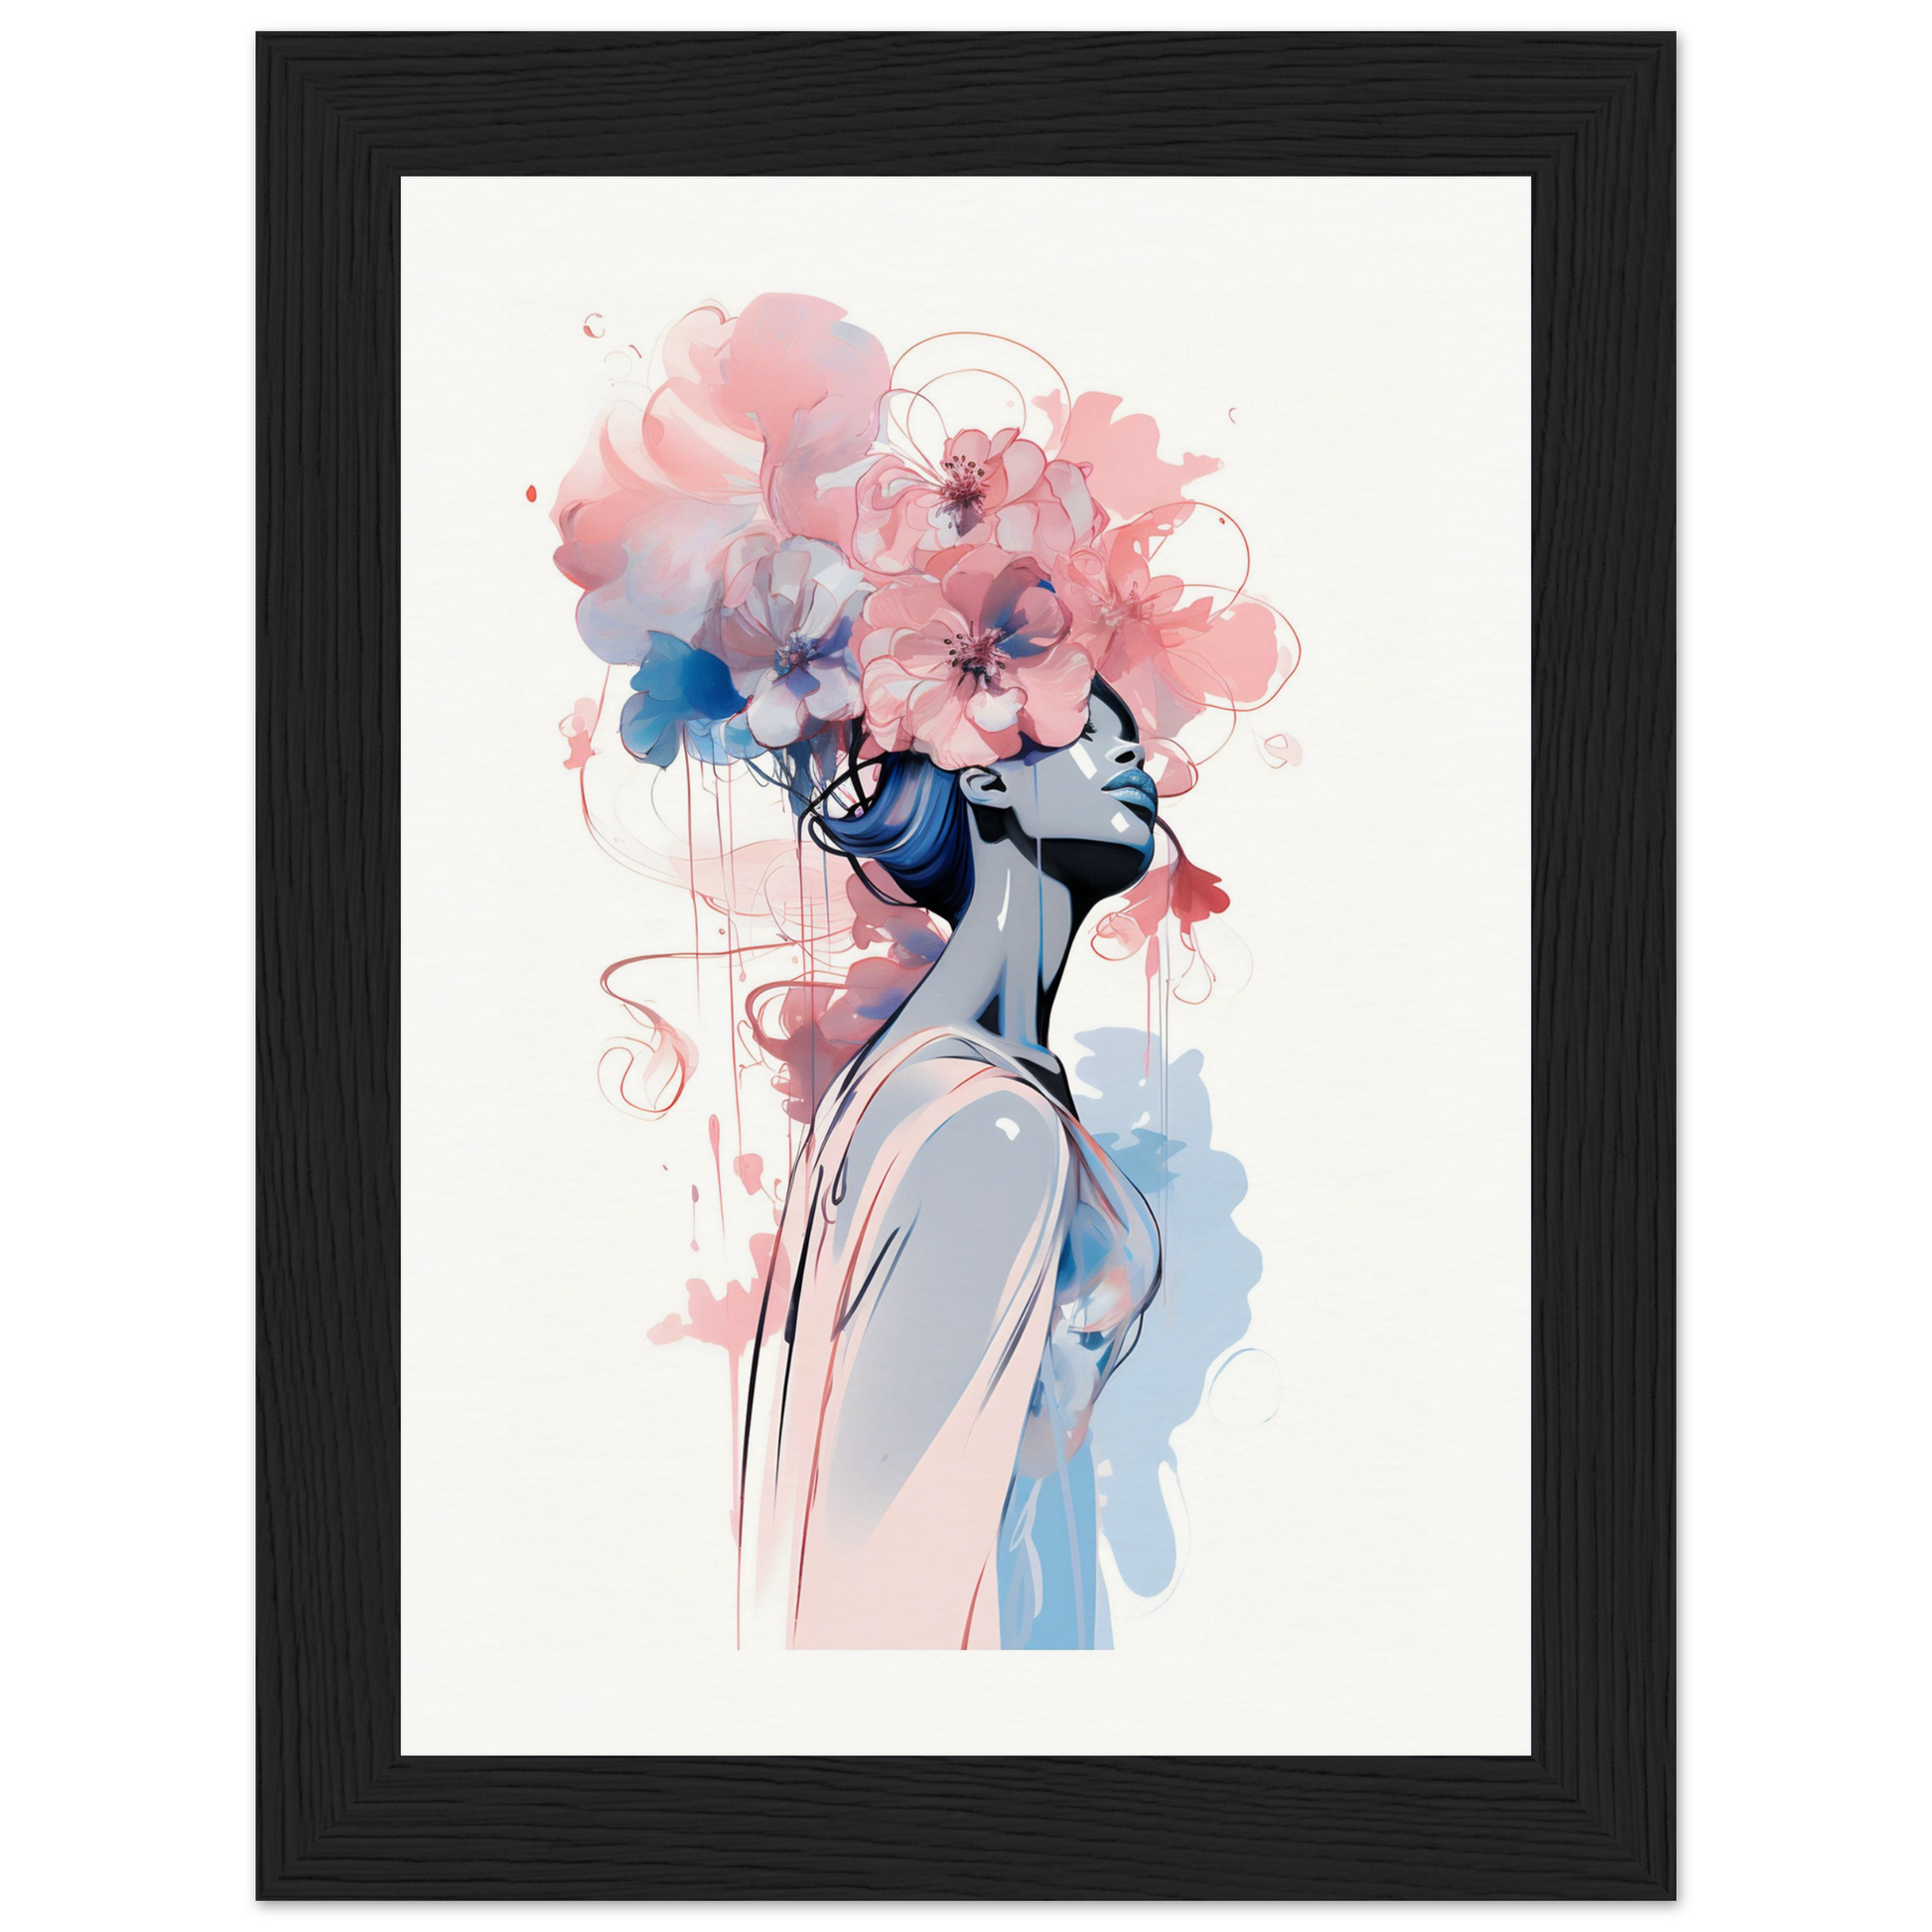 An illustration of a woman with flowers on her head, perfect for the Feminine Frames The Oracle Windows™ Collection poster on my wall.